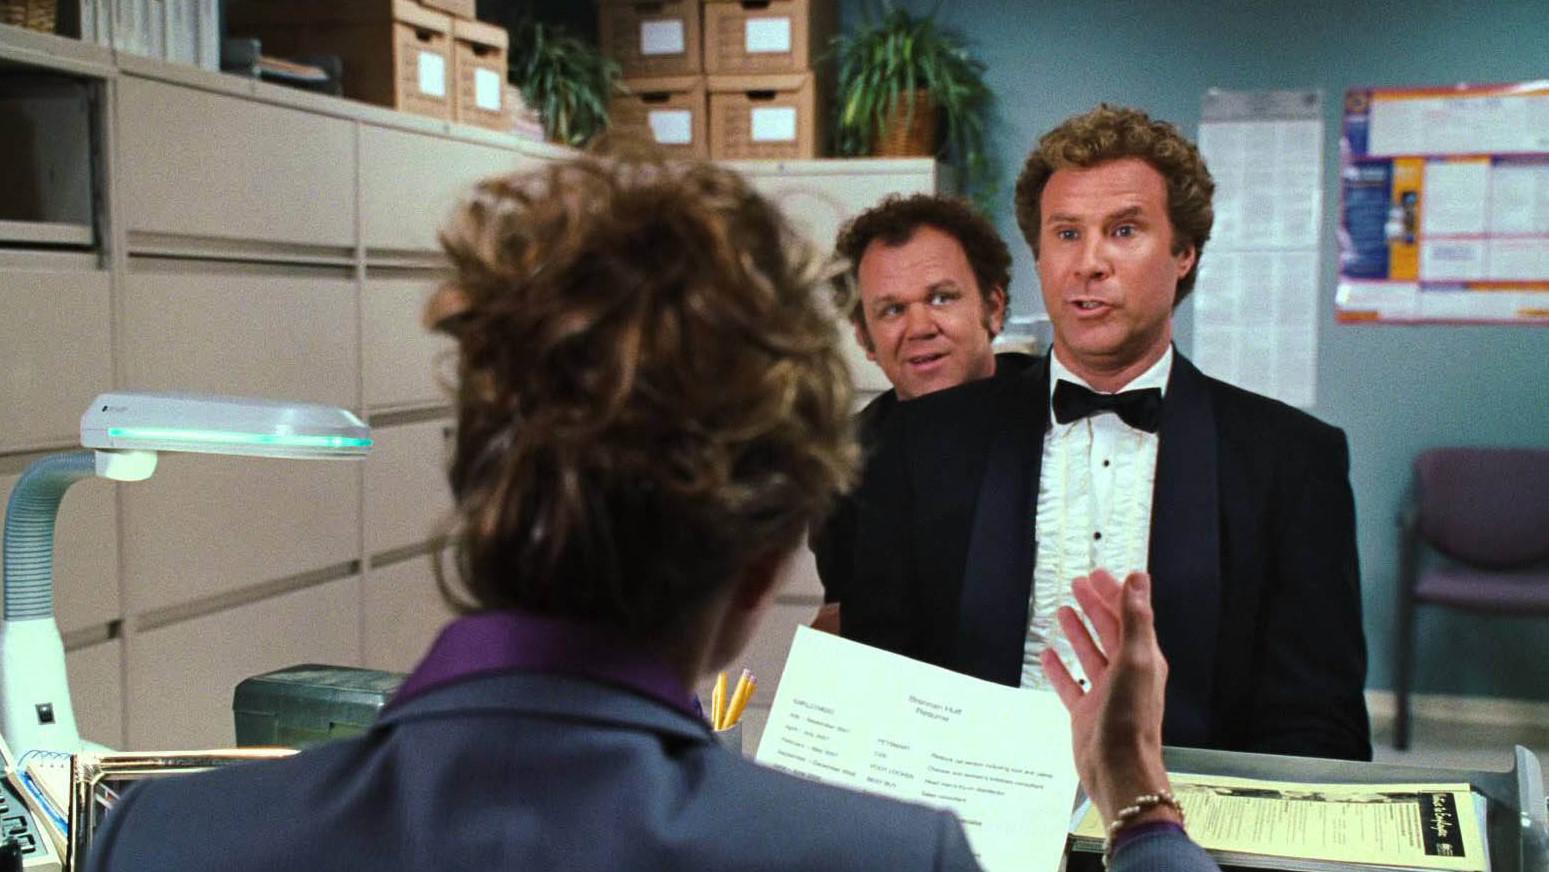 Will Ferrell and John C. Reilly interviewing for a job in 